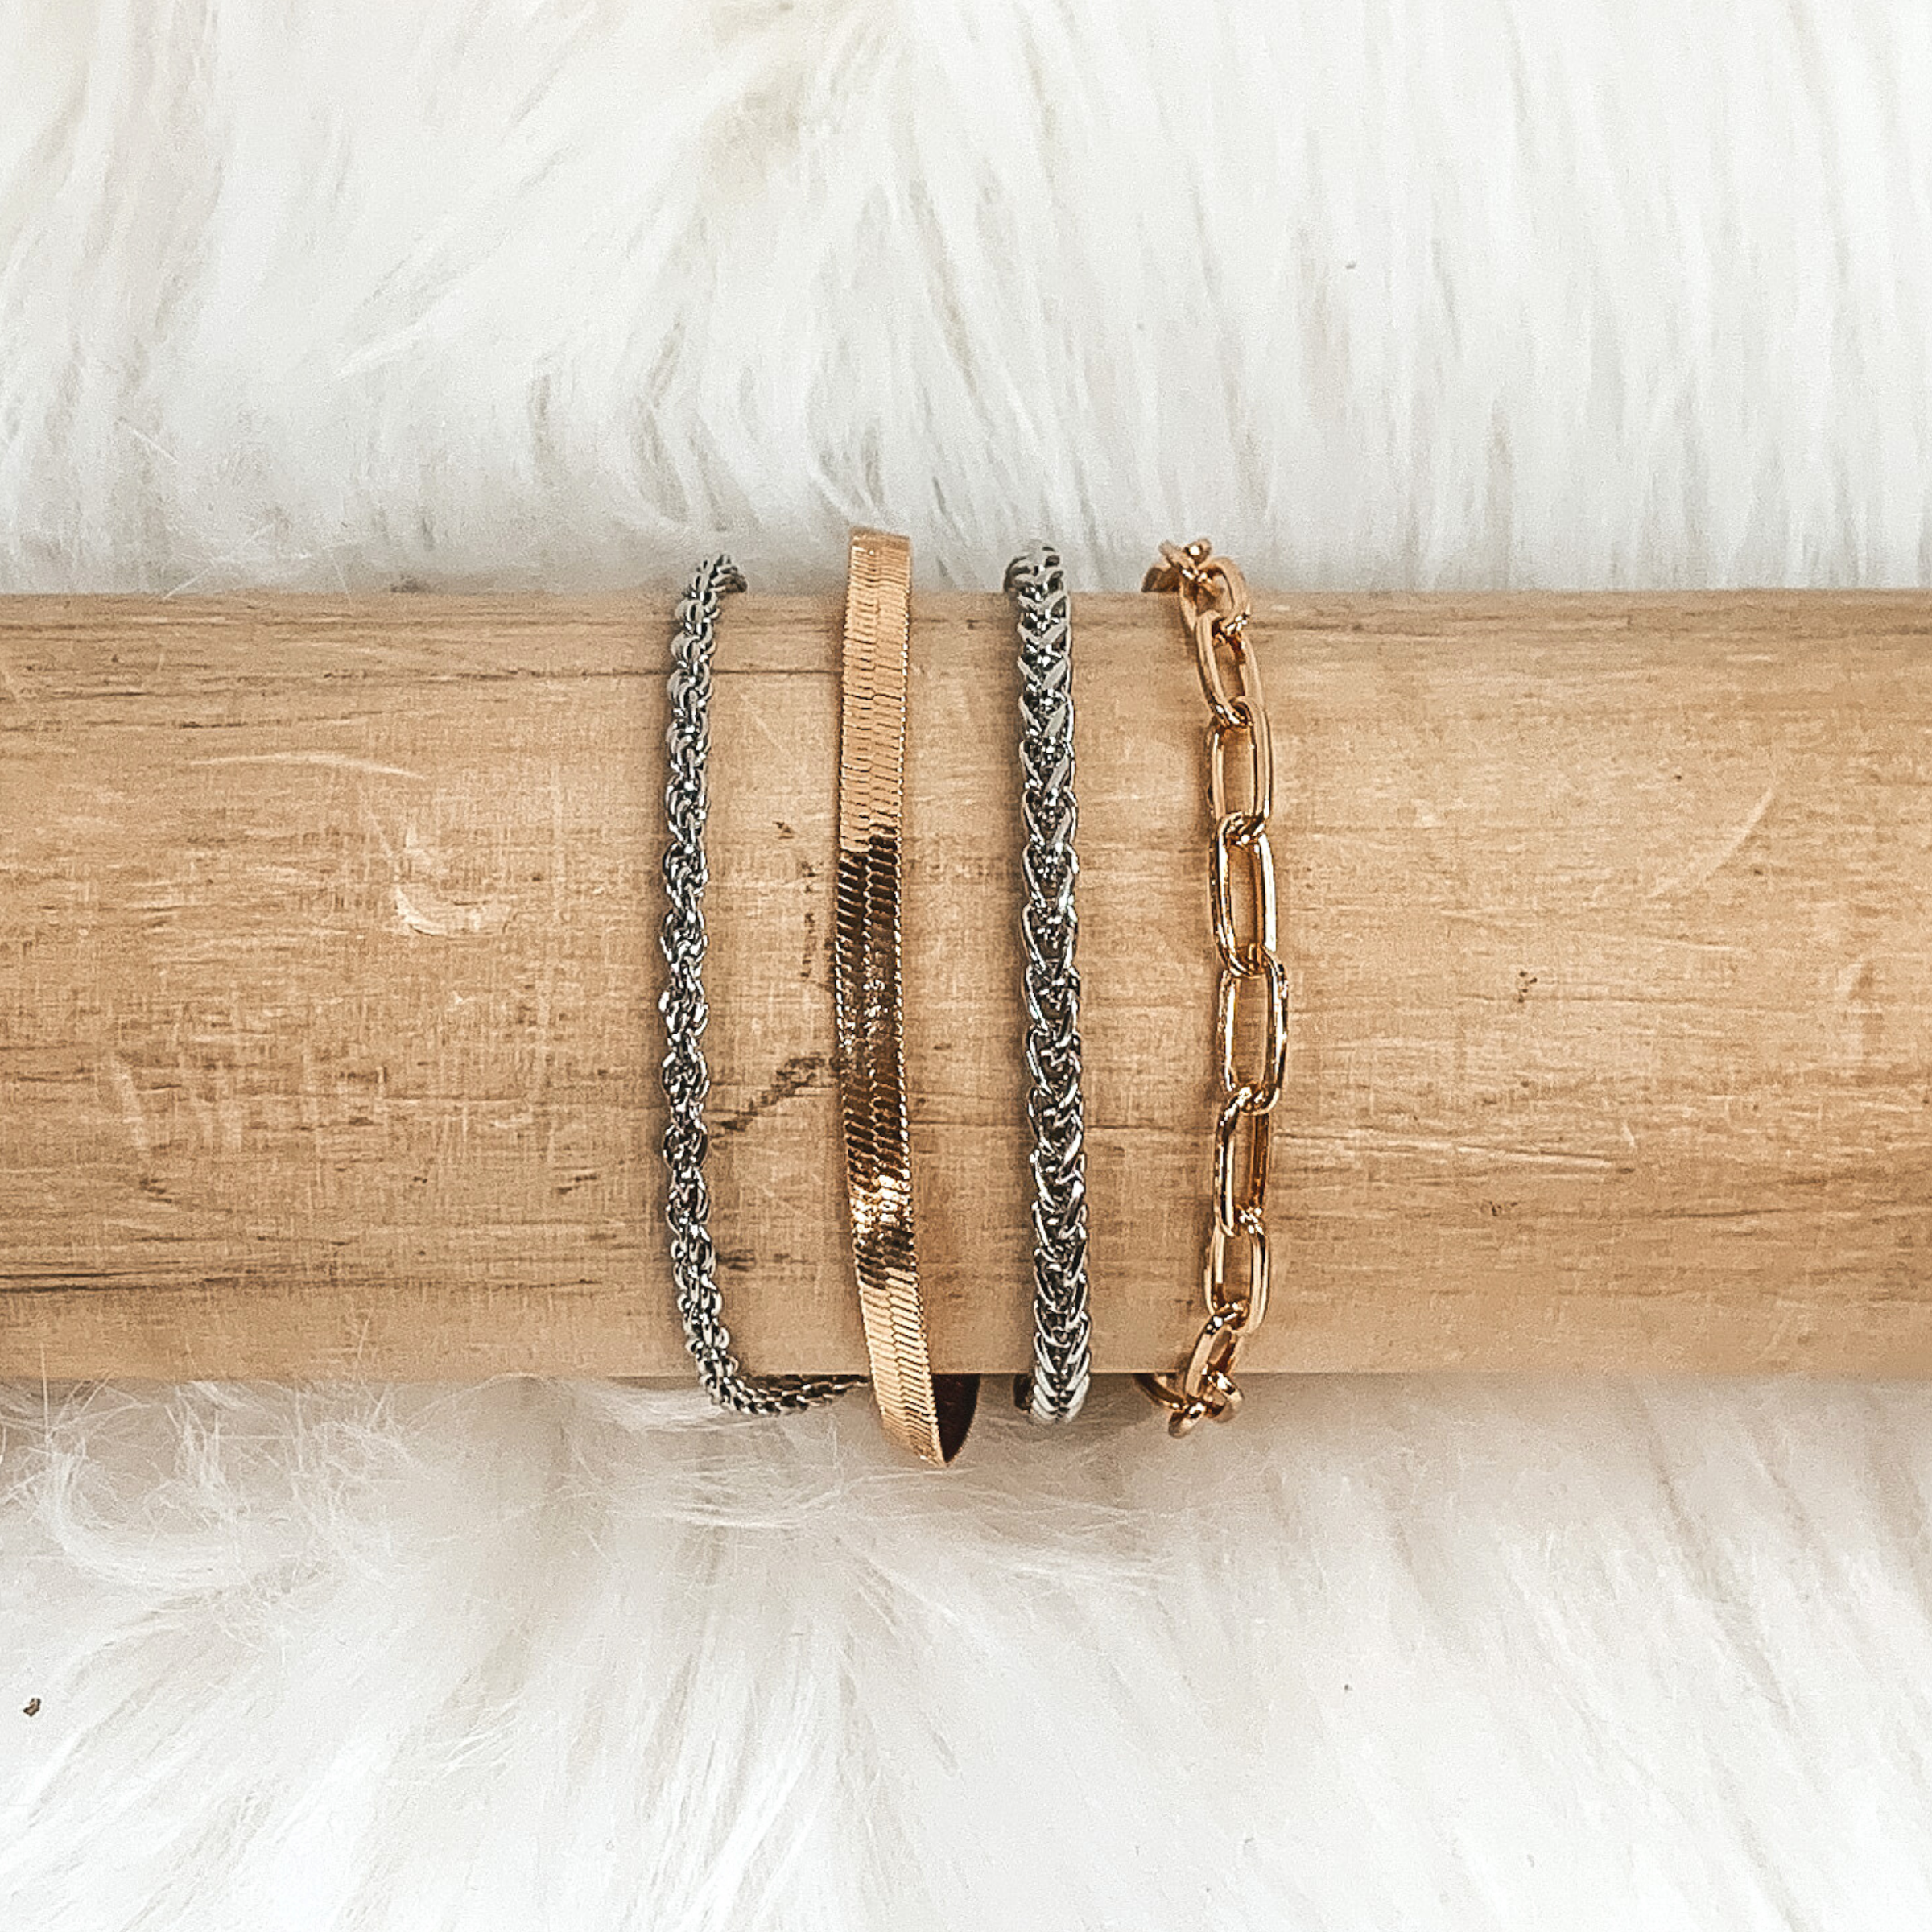 This silver and gold bracelet includes four different types of chains. This bracelet is on a light colored piece of wood pictured on a white fur background. 